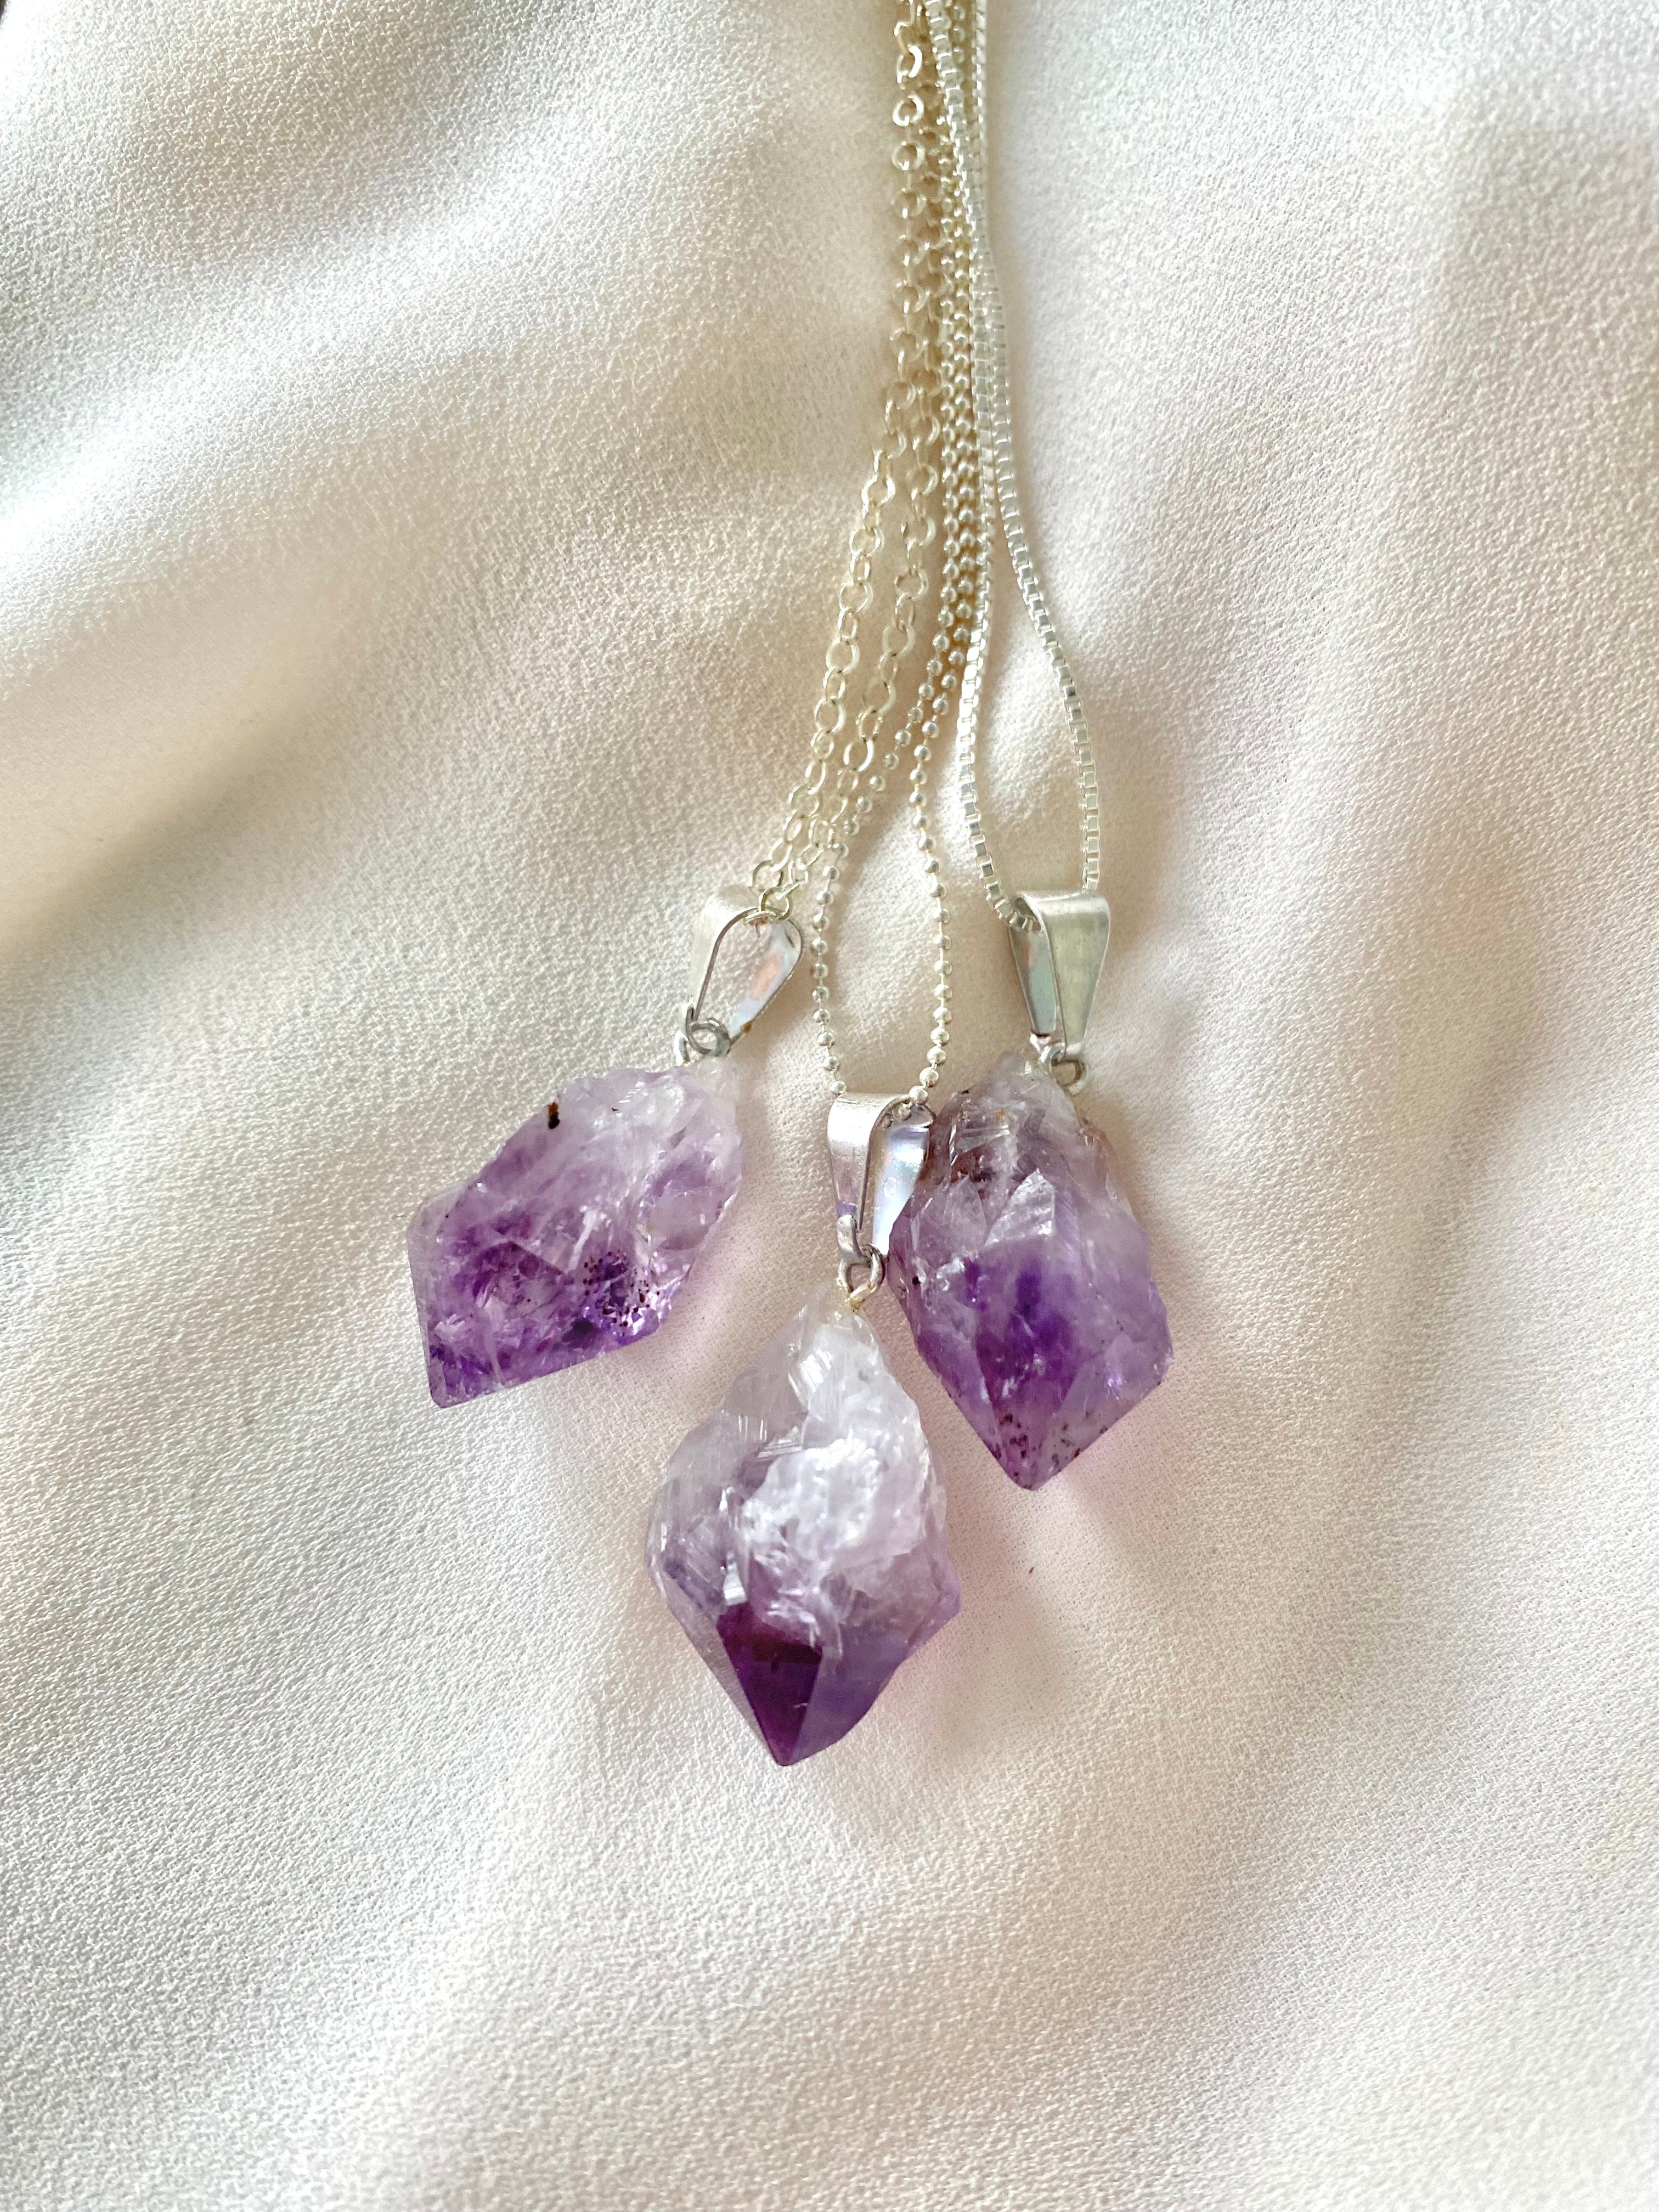 Raw Ombre Amethyst Pendant Necklace - February Birthstone - Silver